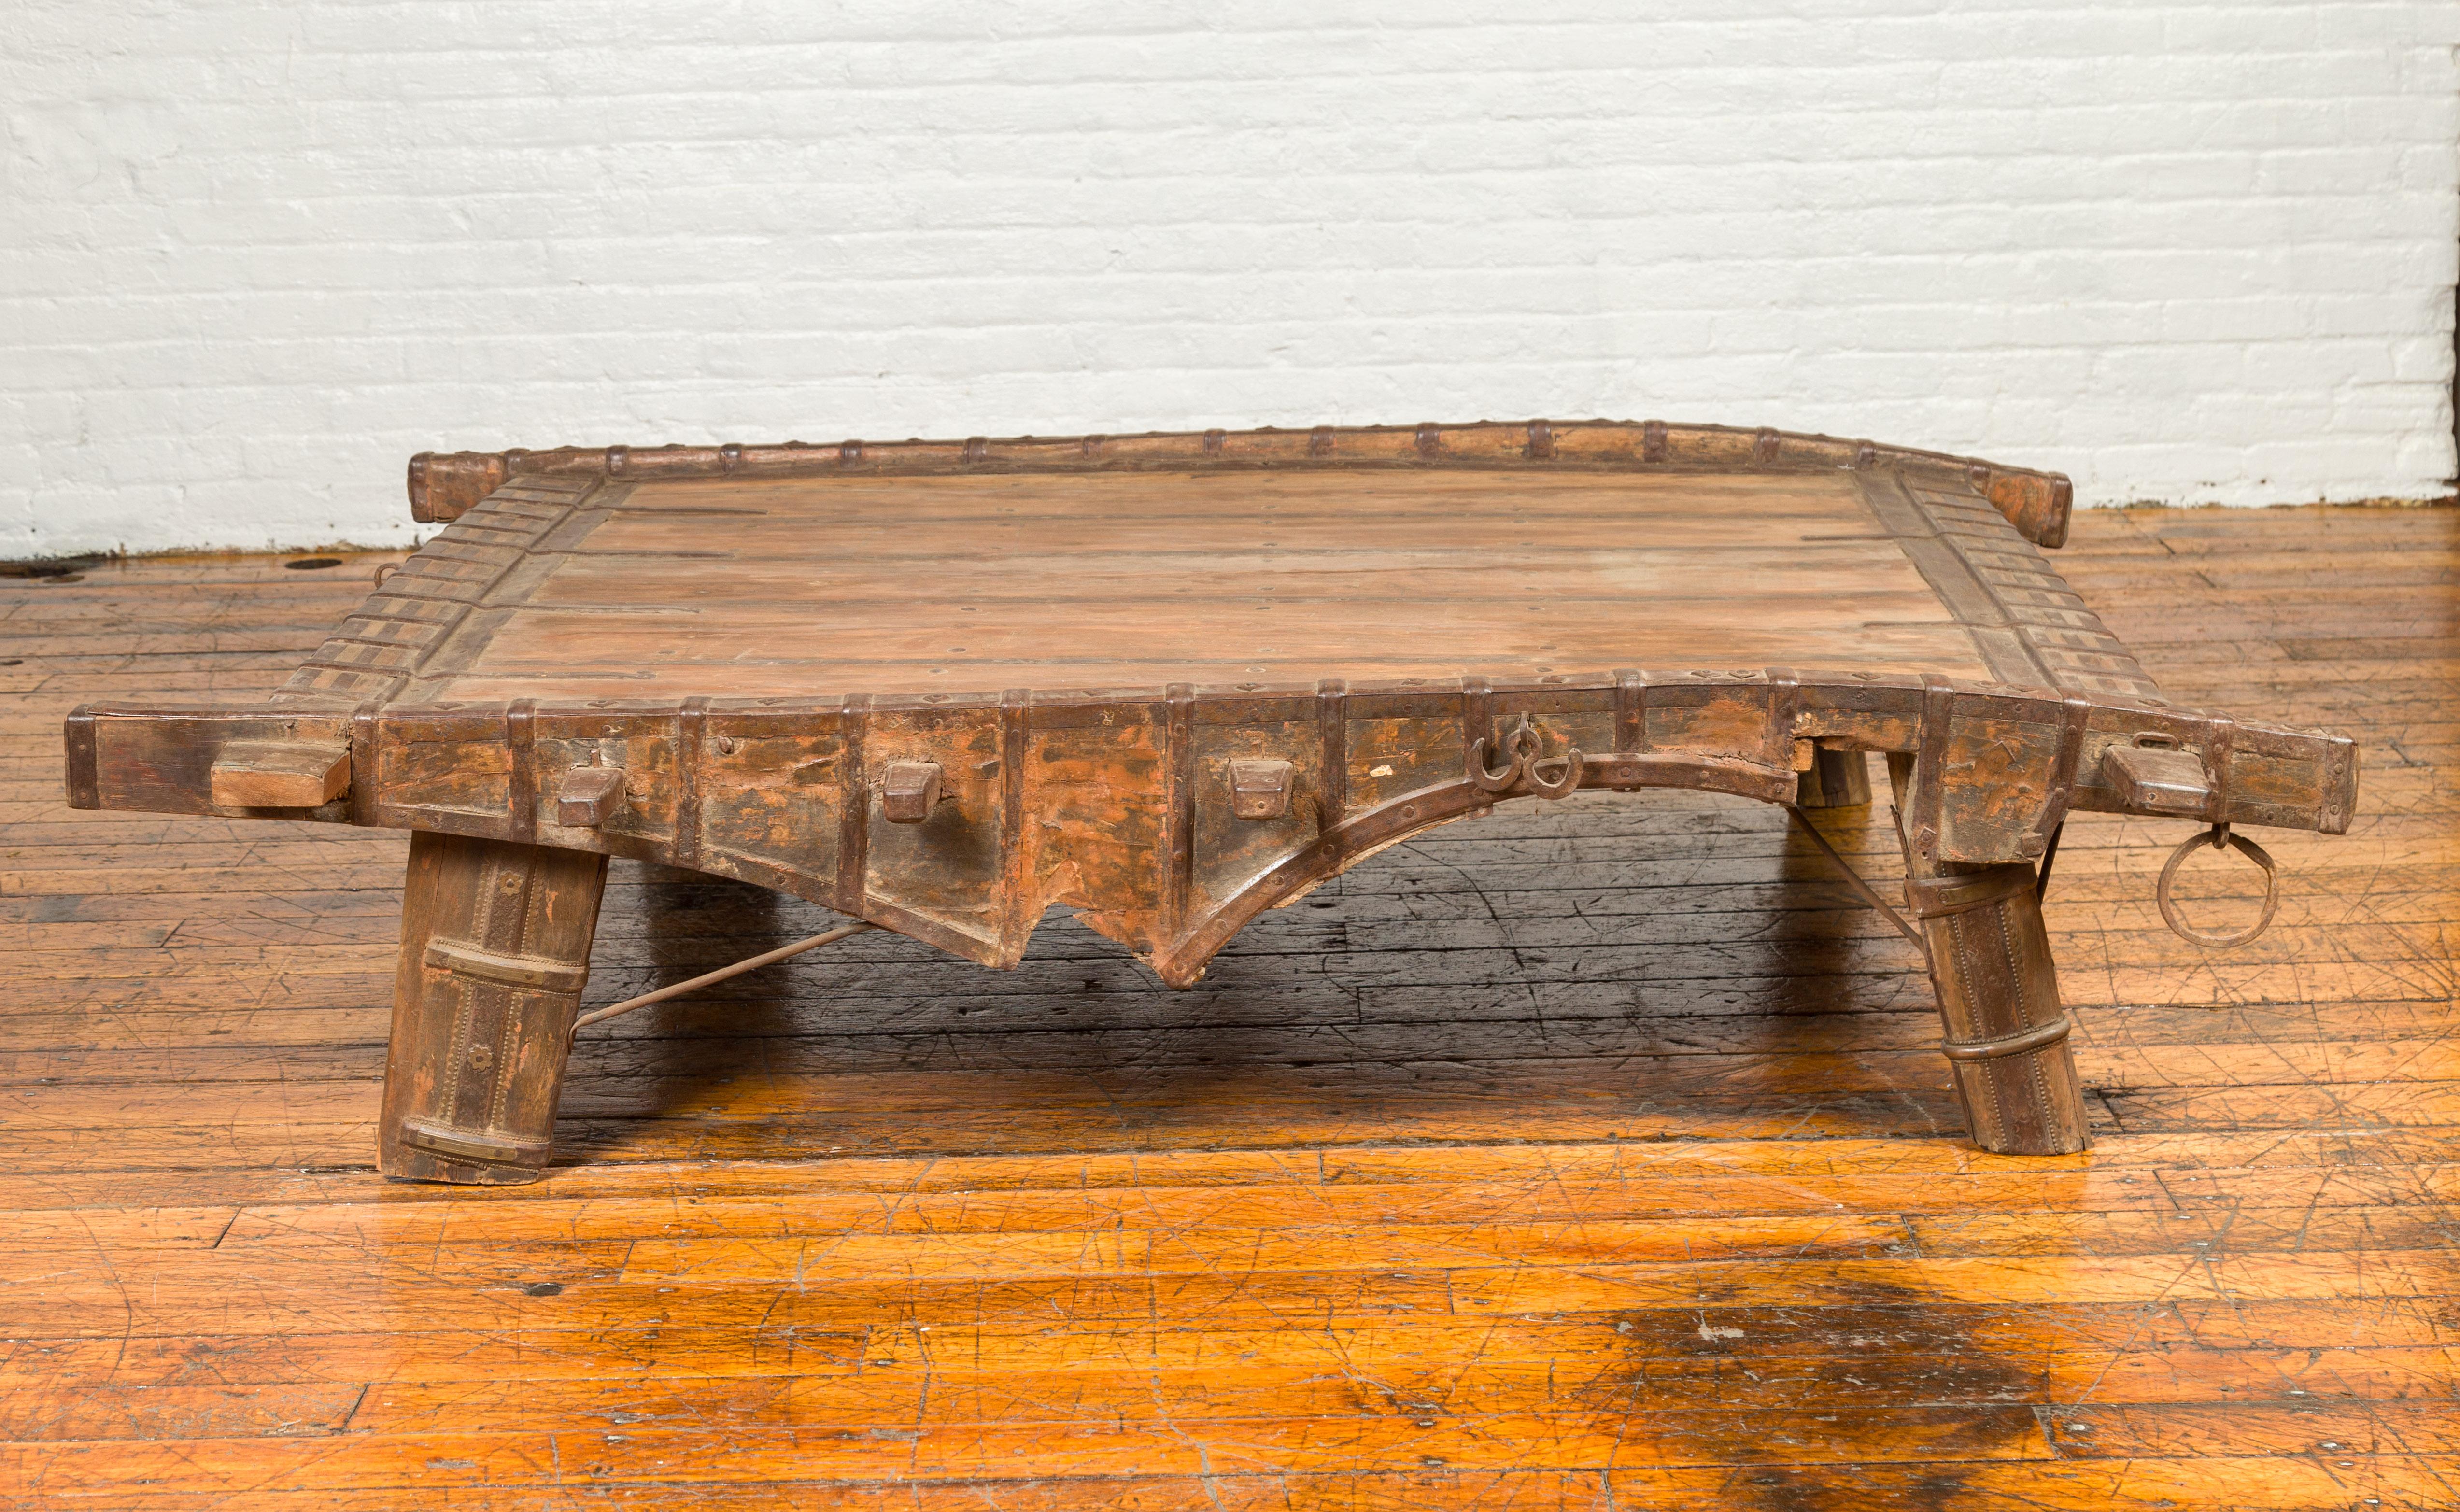 An Indian rustic wooden ox cart from the 19th century, made into a coffee table with uneven top and metal accents. Perfect to be used as a coffee table, this conversation piece is an old wooden ox cart accented with metal accents and raised on